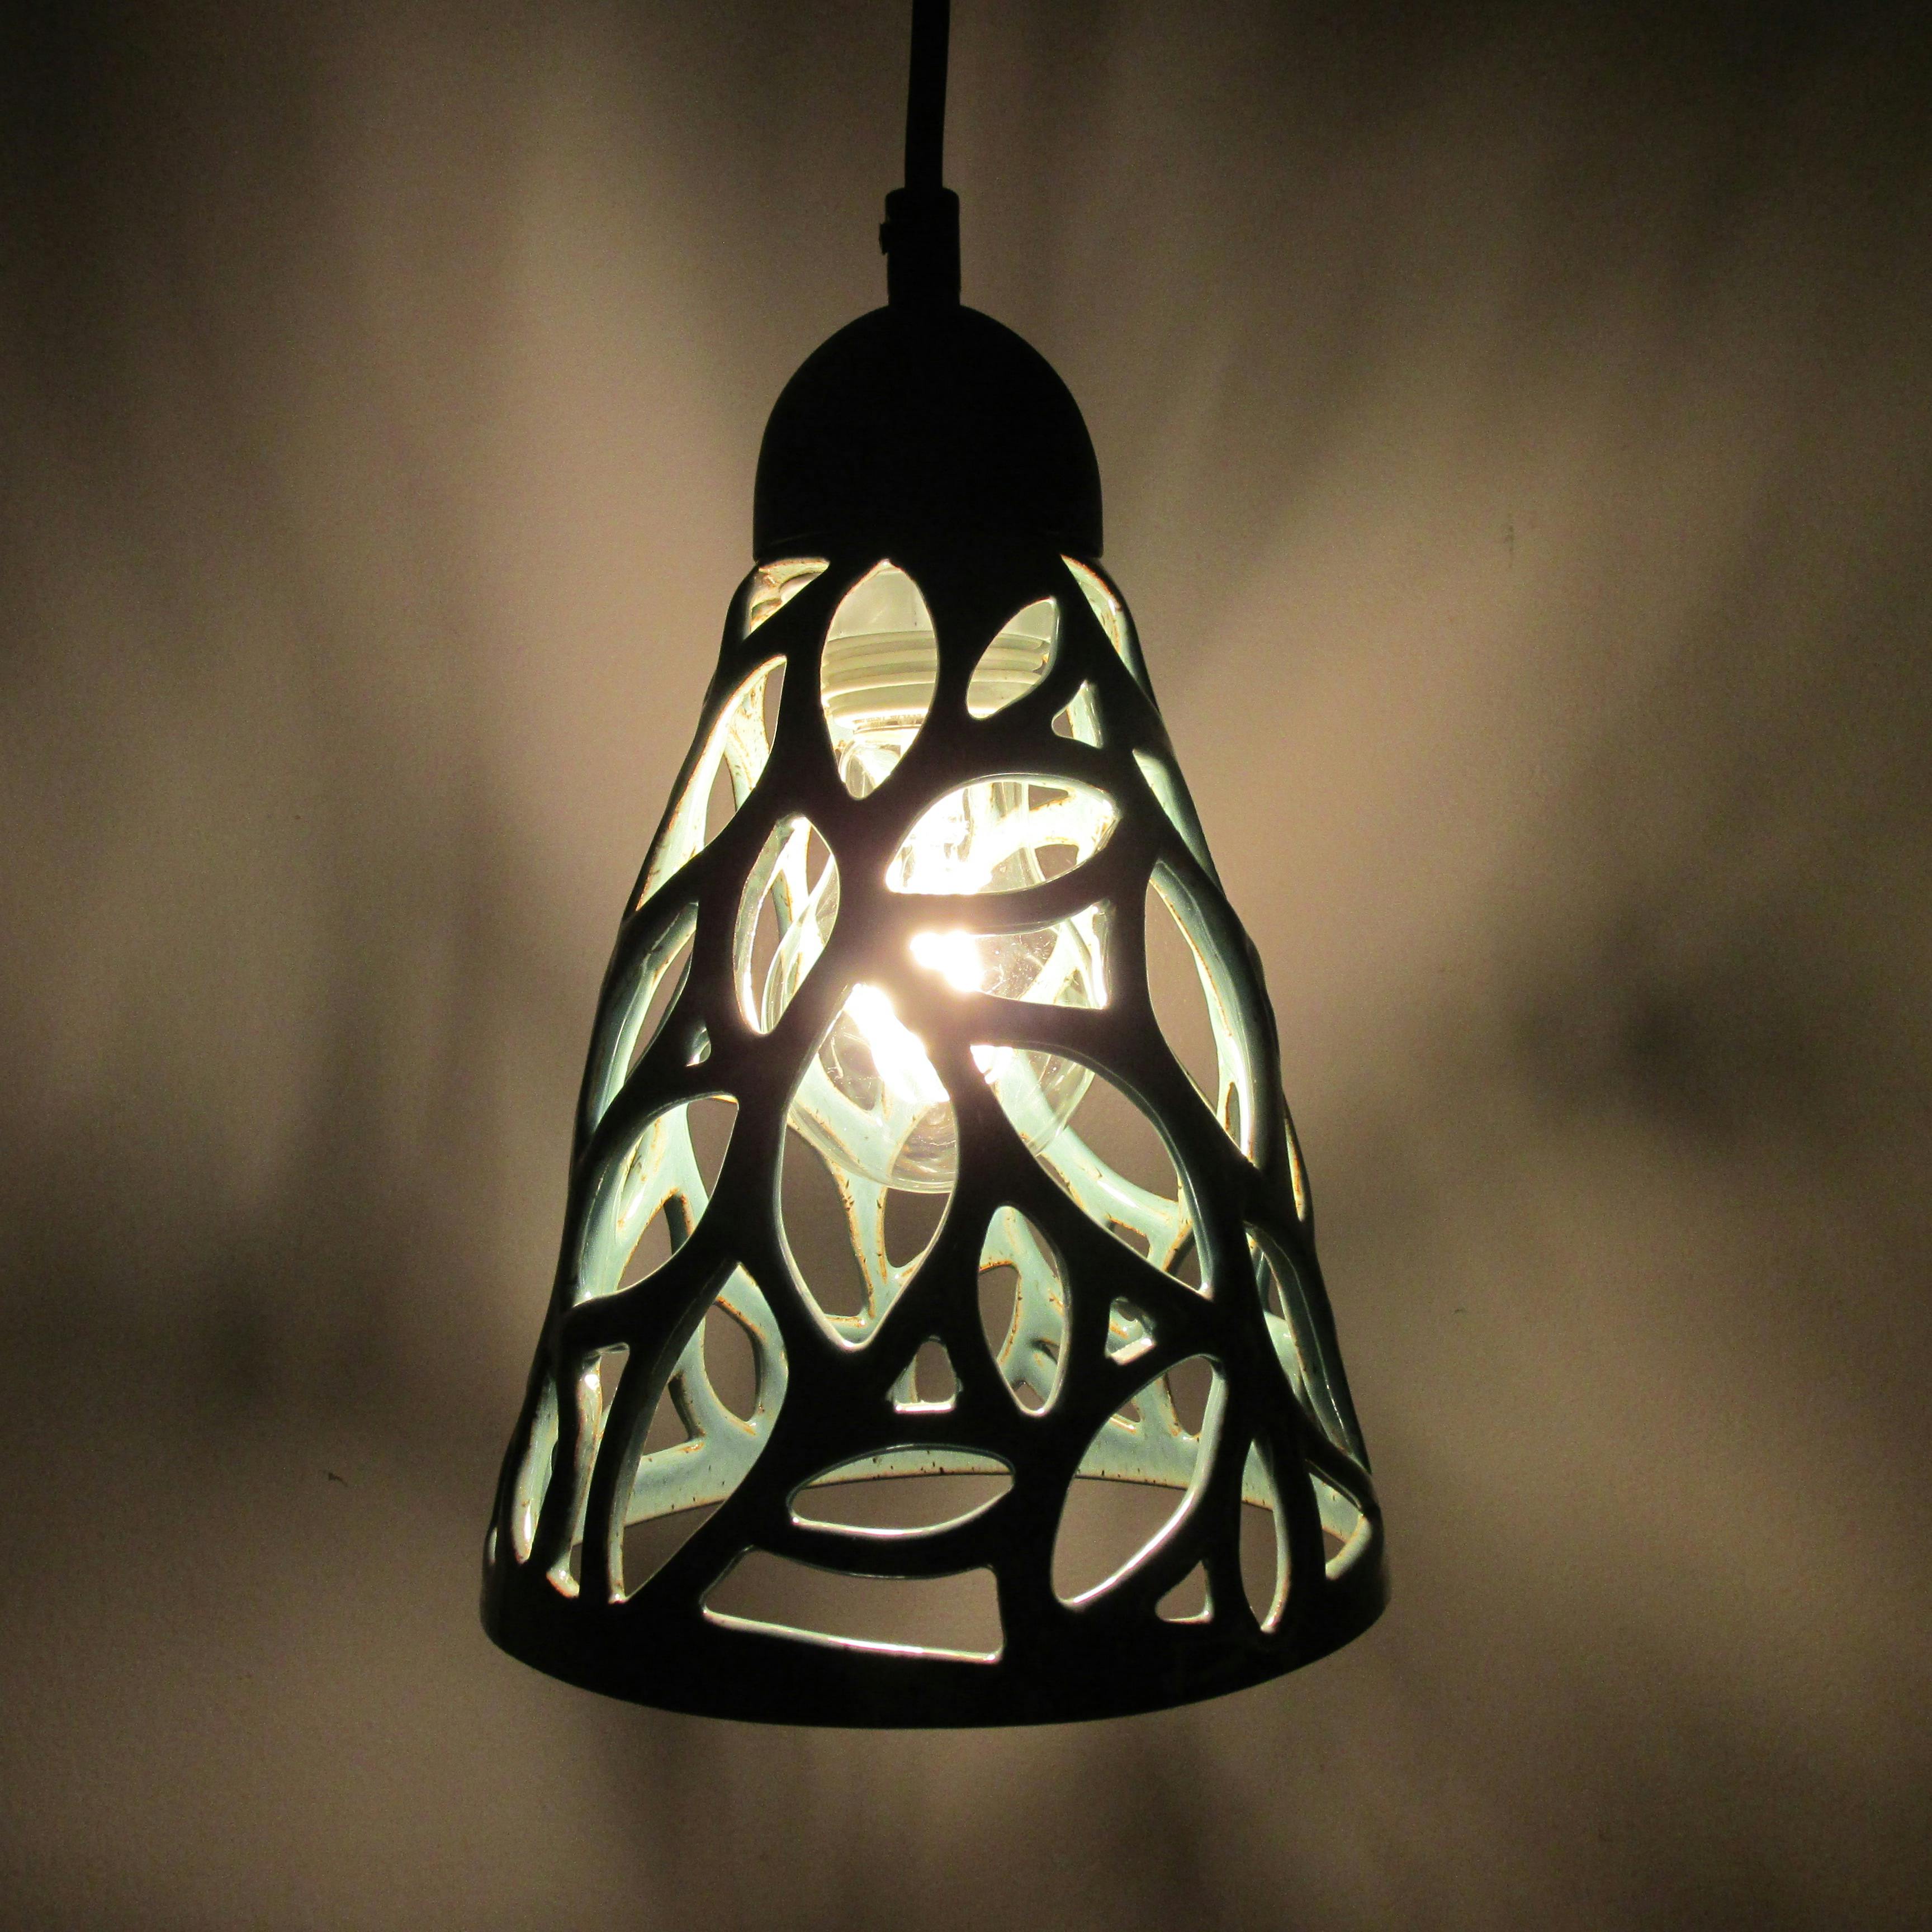 ceramic light fixture with light turned on casting shadows through leaf like patterns into a dark room